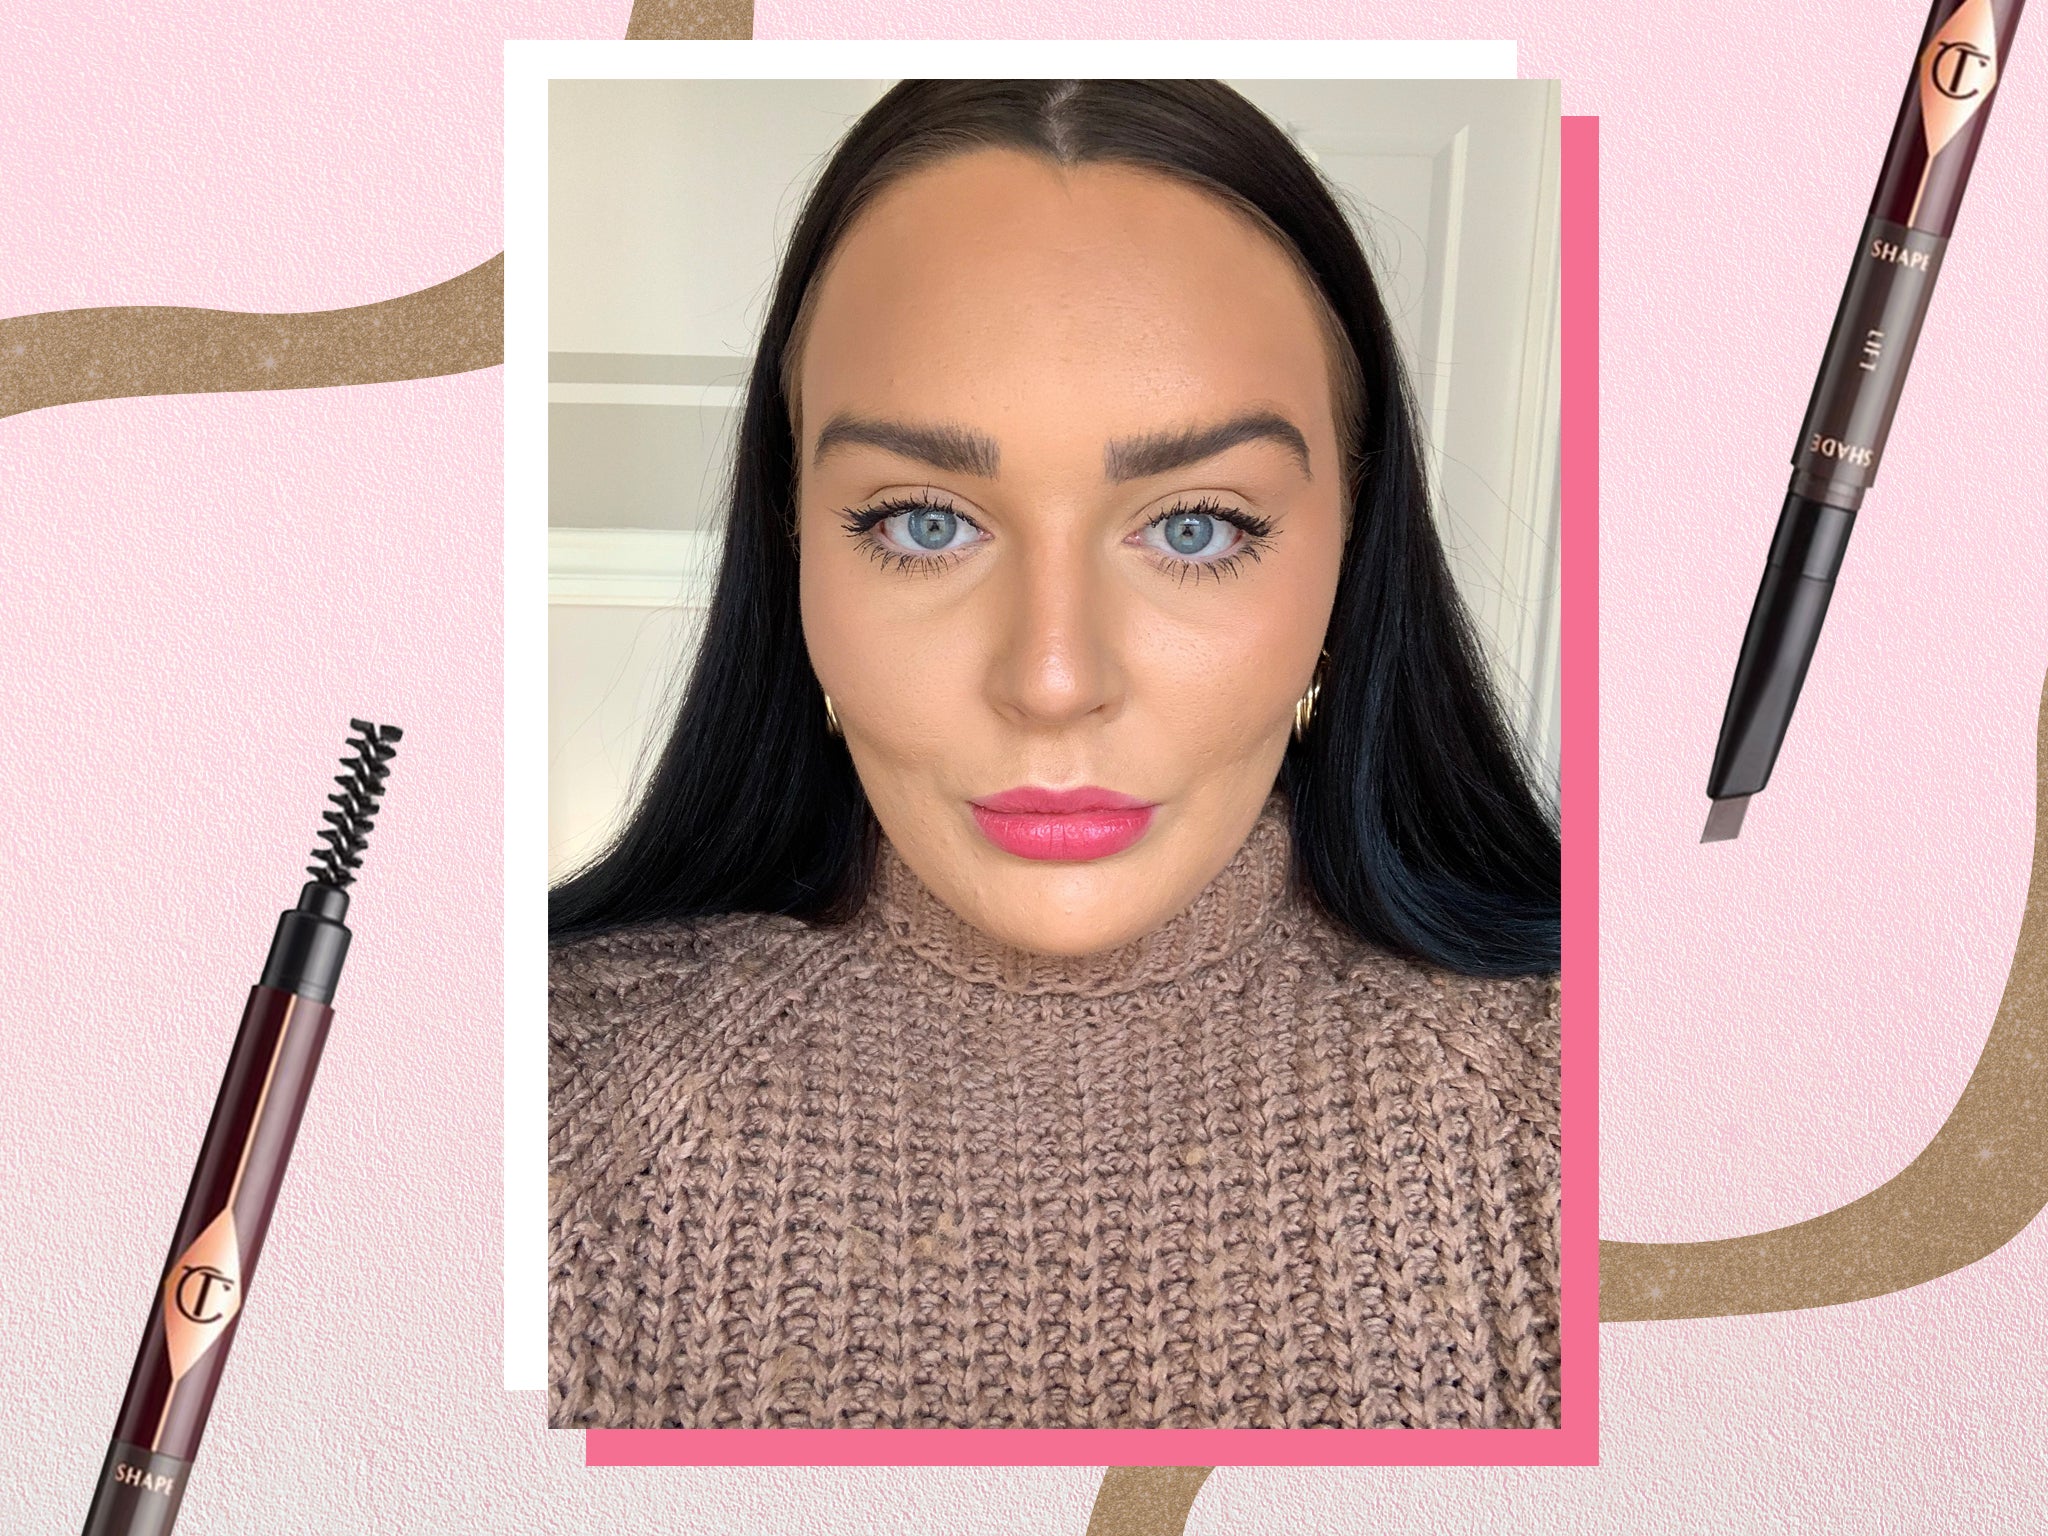 The range centres around the pursuit of the fluffy, lifted ‘supermodel’ brow